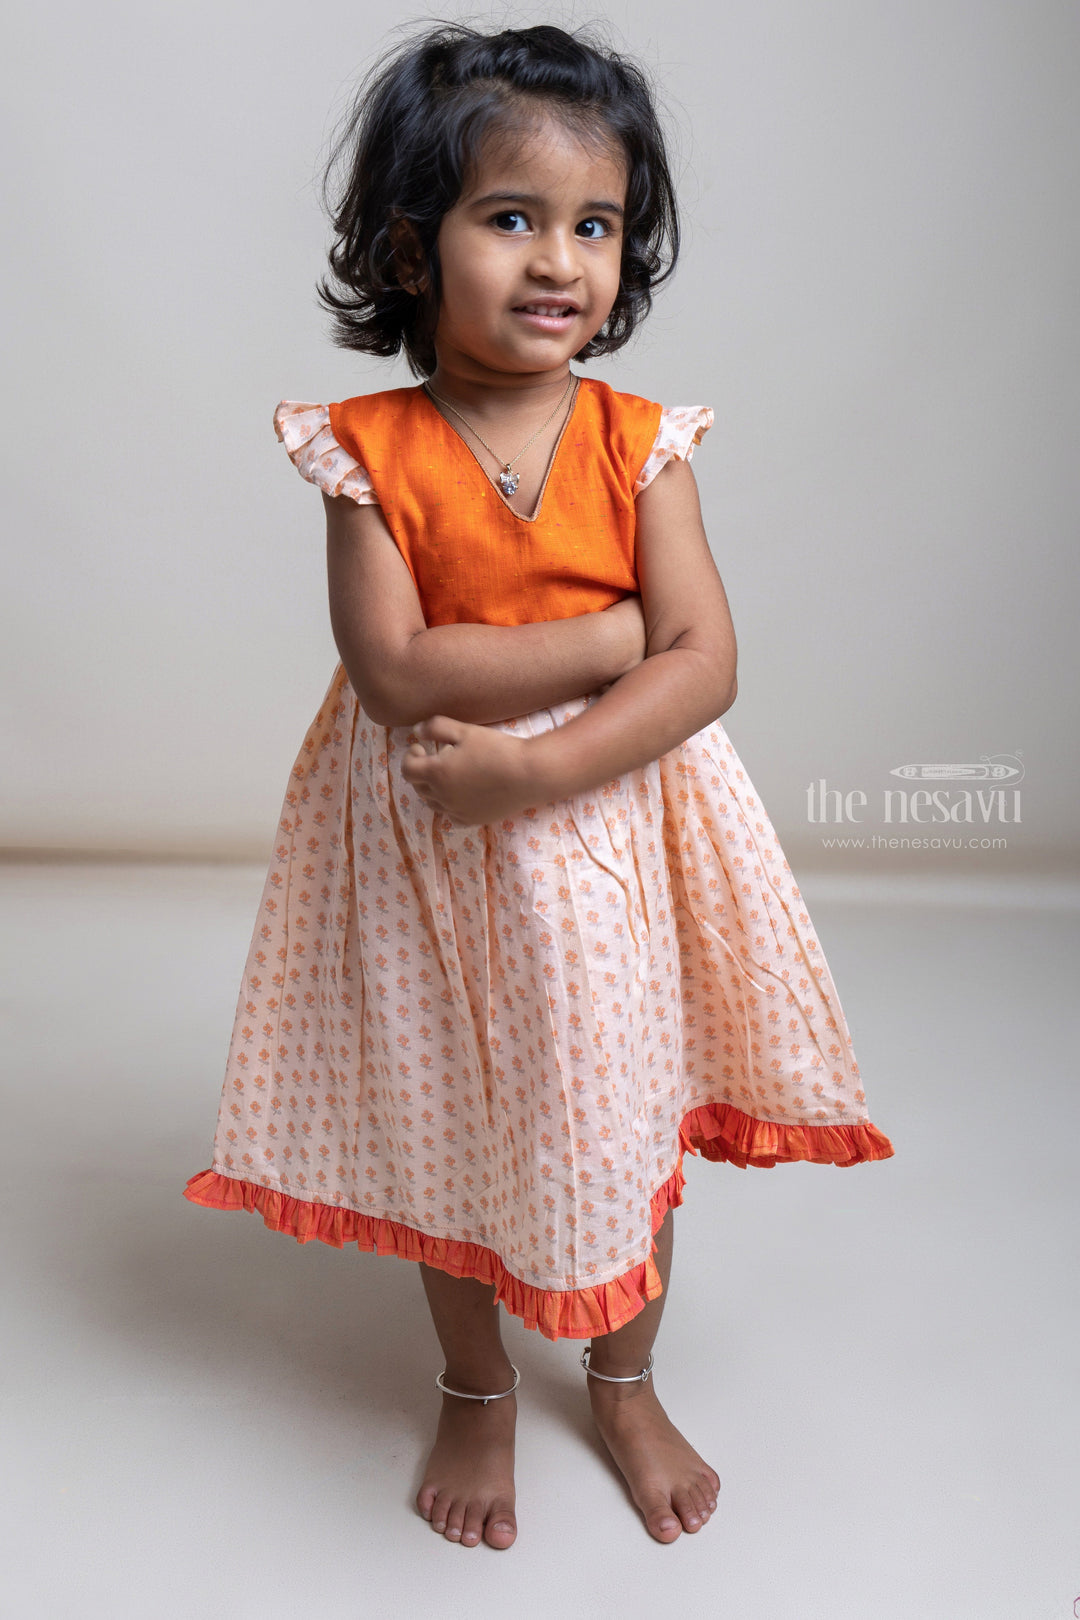 The Nesavu Girls Cotton Frock Charming Orange Yoke And Floral Printed Cotton Frock For Girls Nesavu 12 (3M) / Orange / Cotton GFC757B Gorgeous Floral Printed Cotton Frock For Girls | The Nesavu